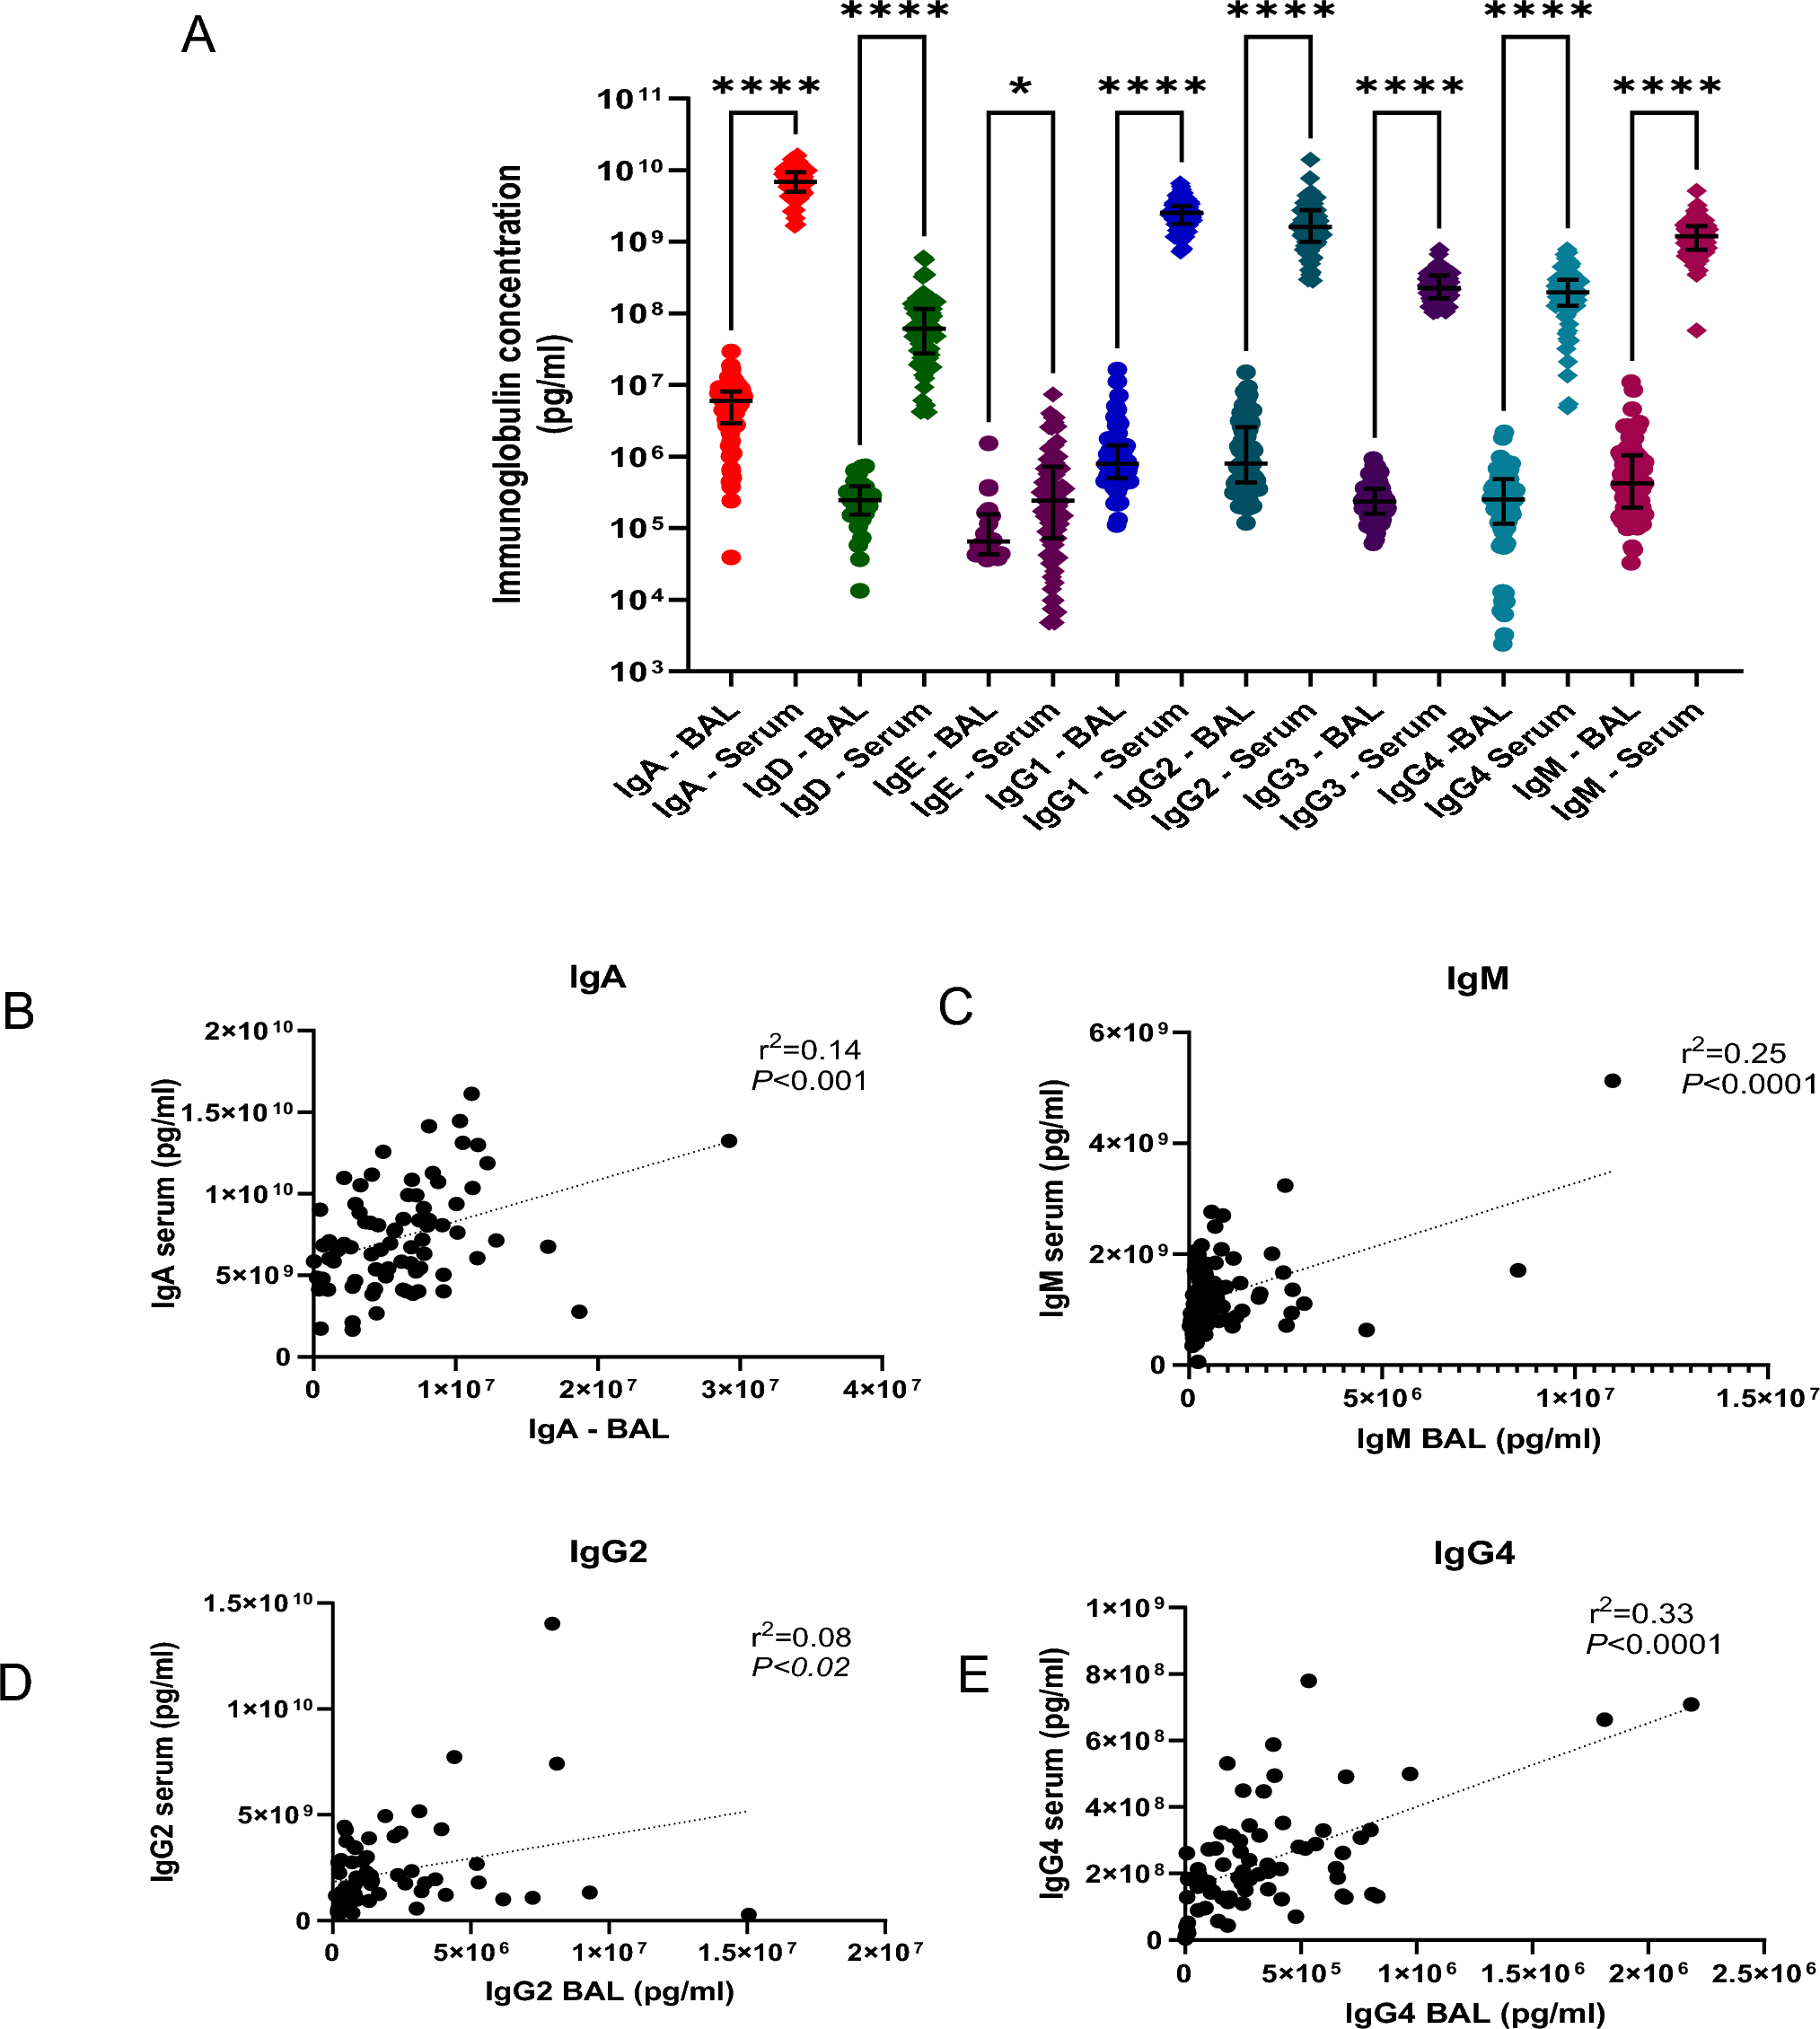 Airway and Systemic Immunoglobulin Profiling and Immune Response in Adult Asthma